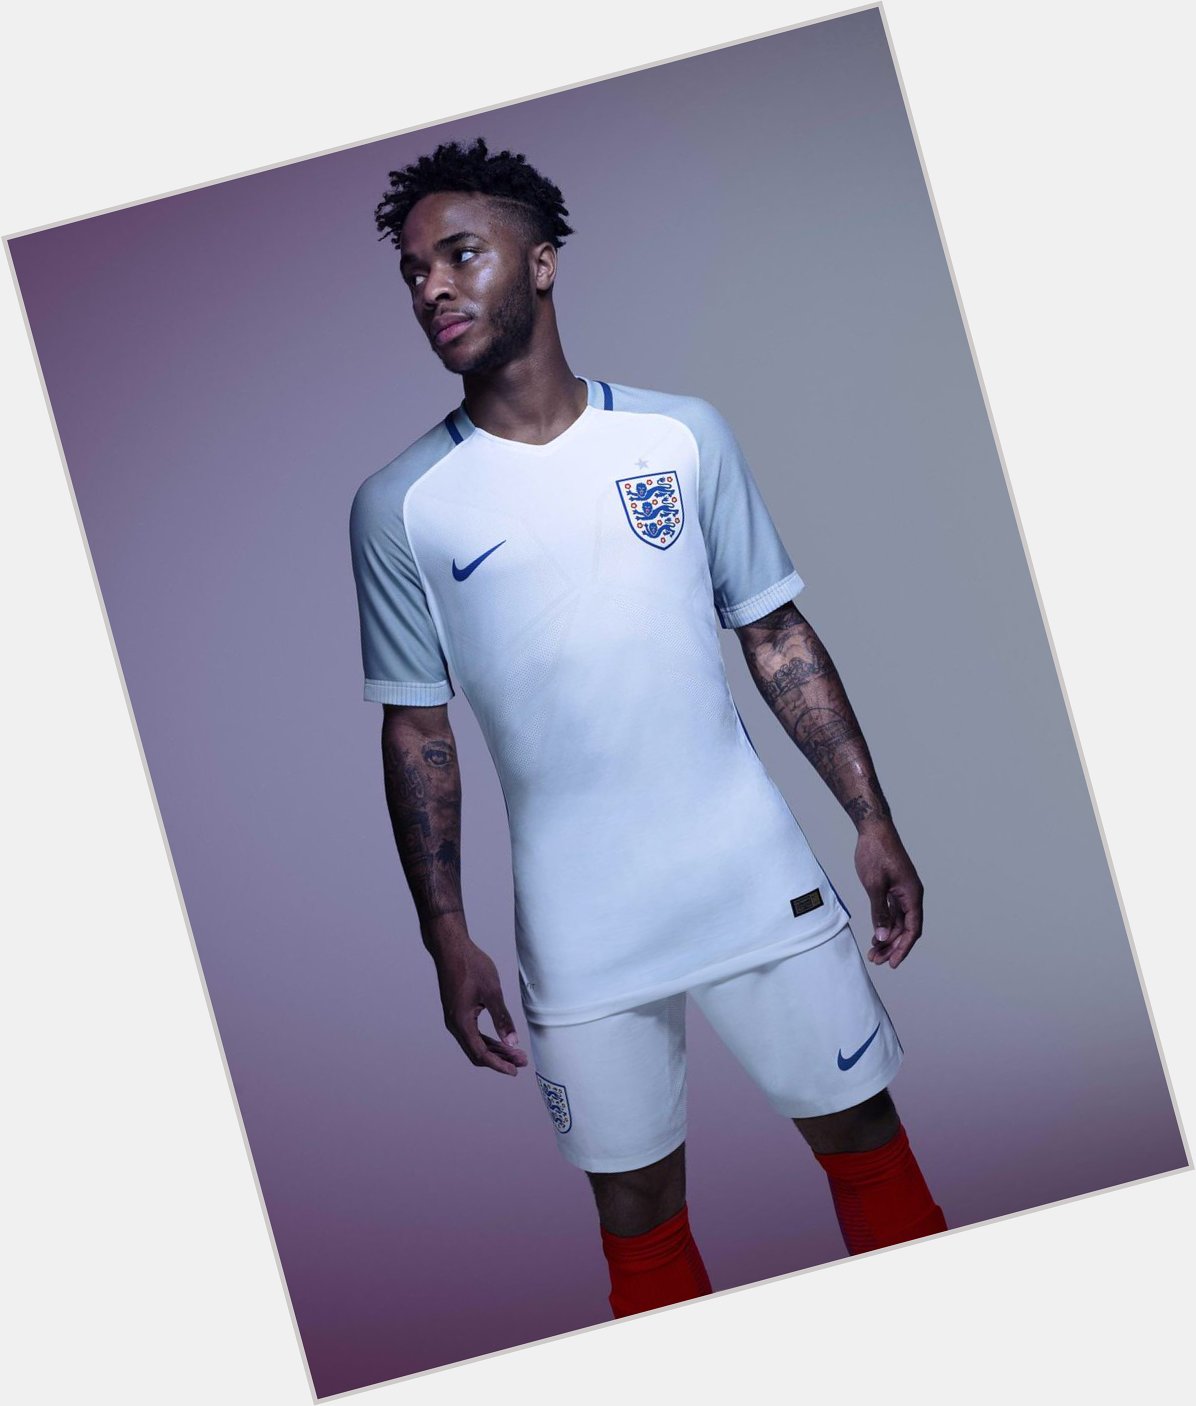 Happy birthday to Raheem Sterling. The Manchester City and England forward turns 23 today. 